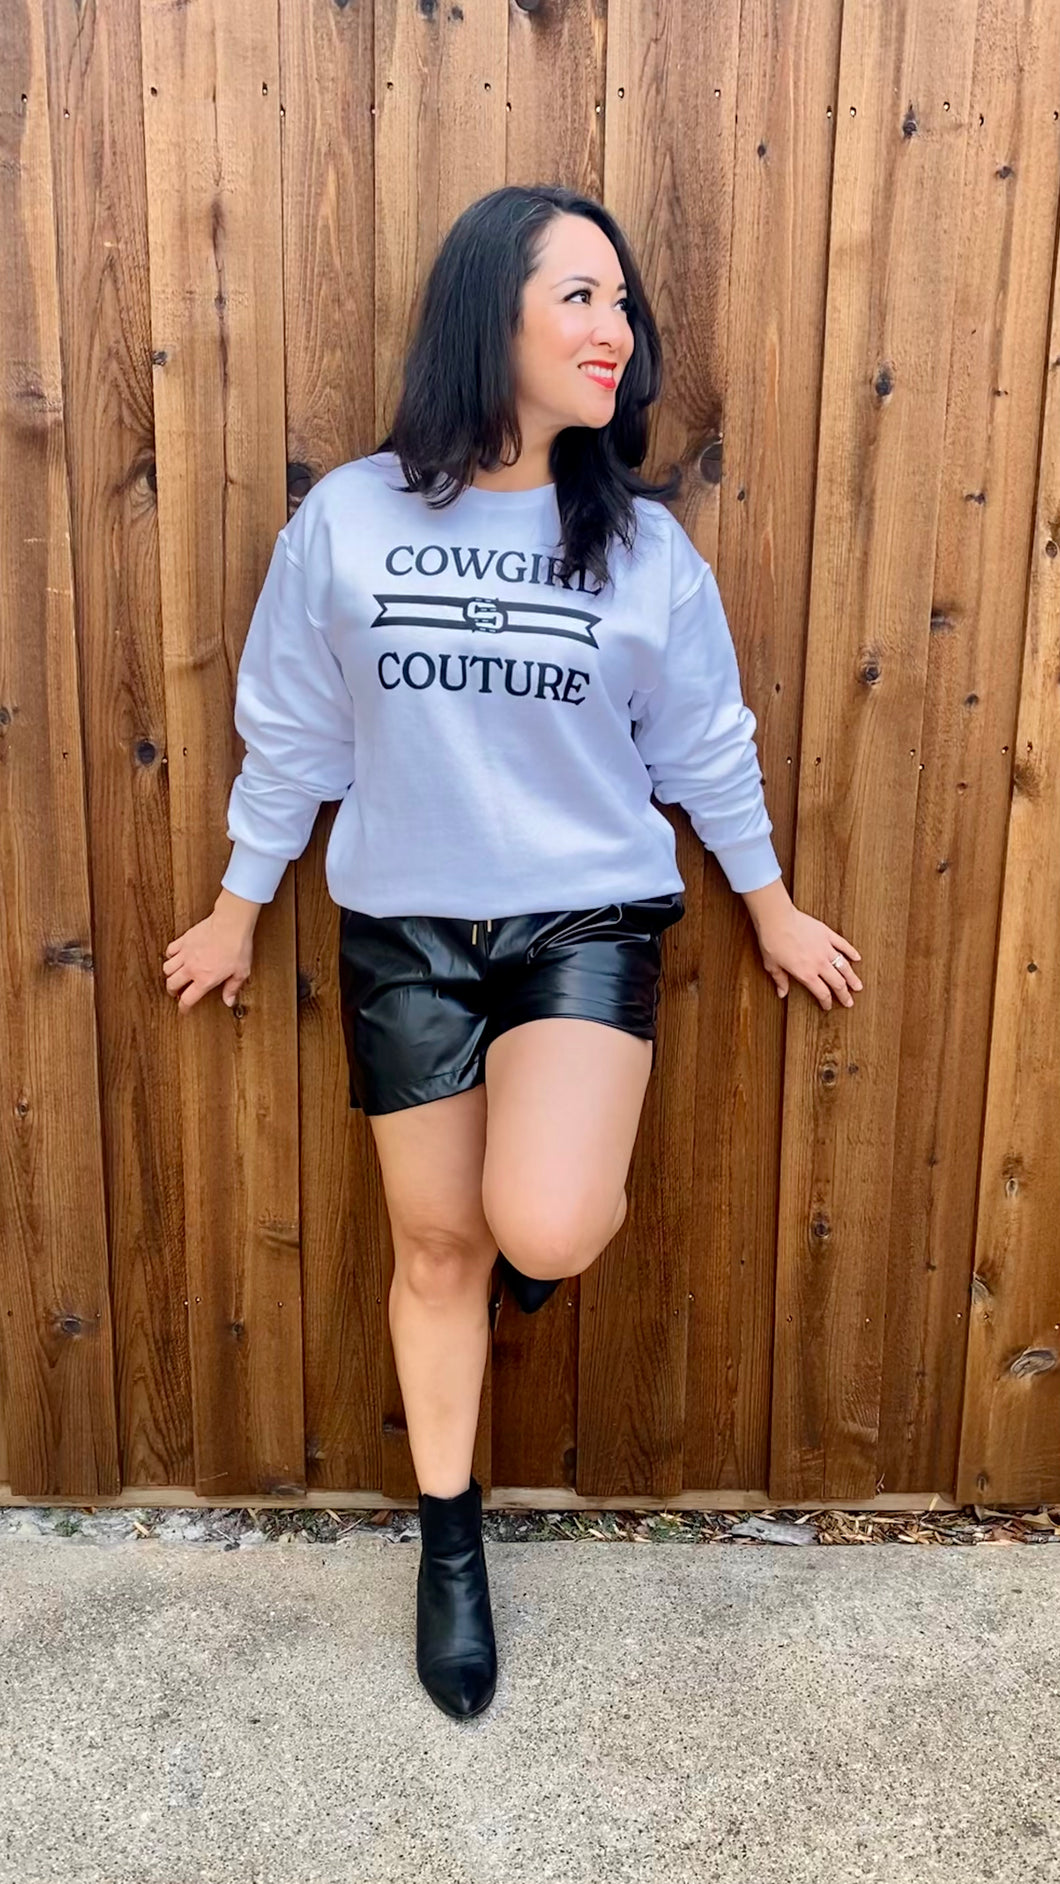 COWGIRL COUTURE SWEATSHIRT